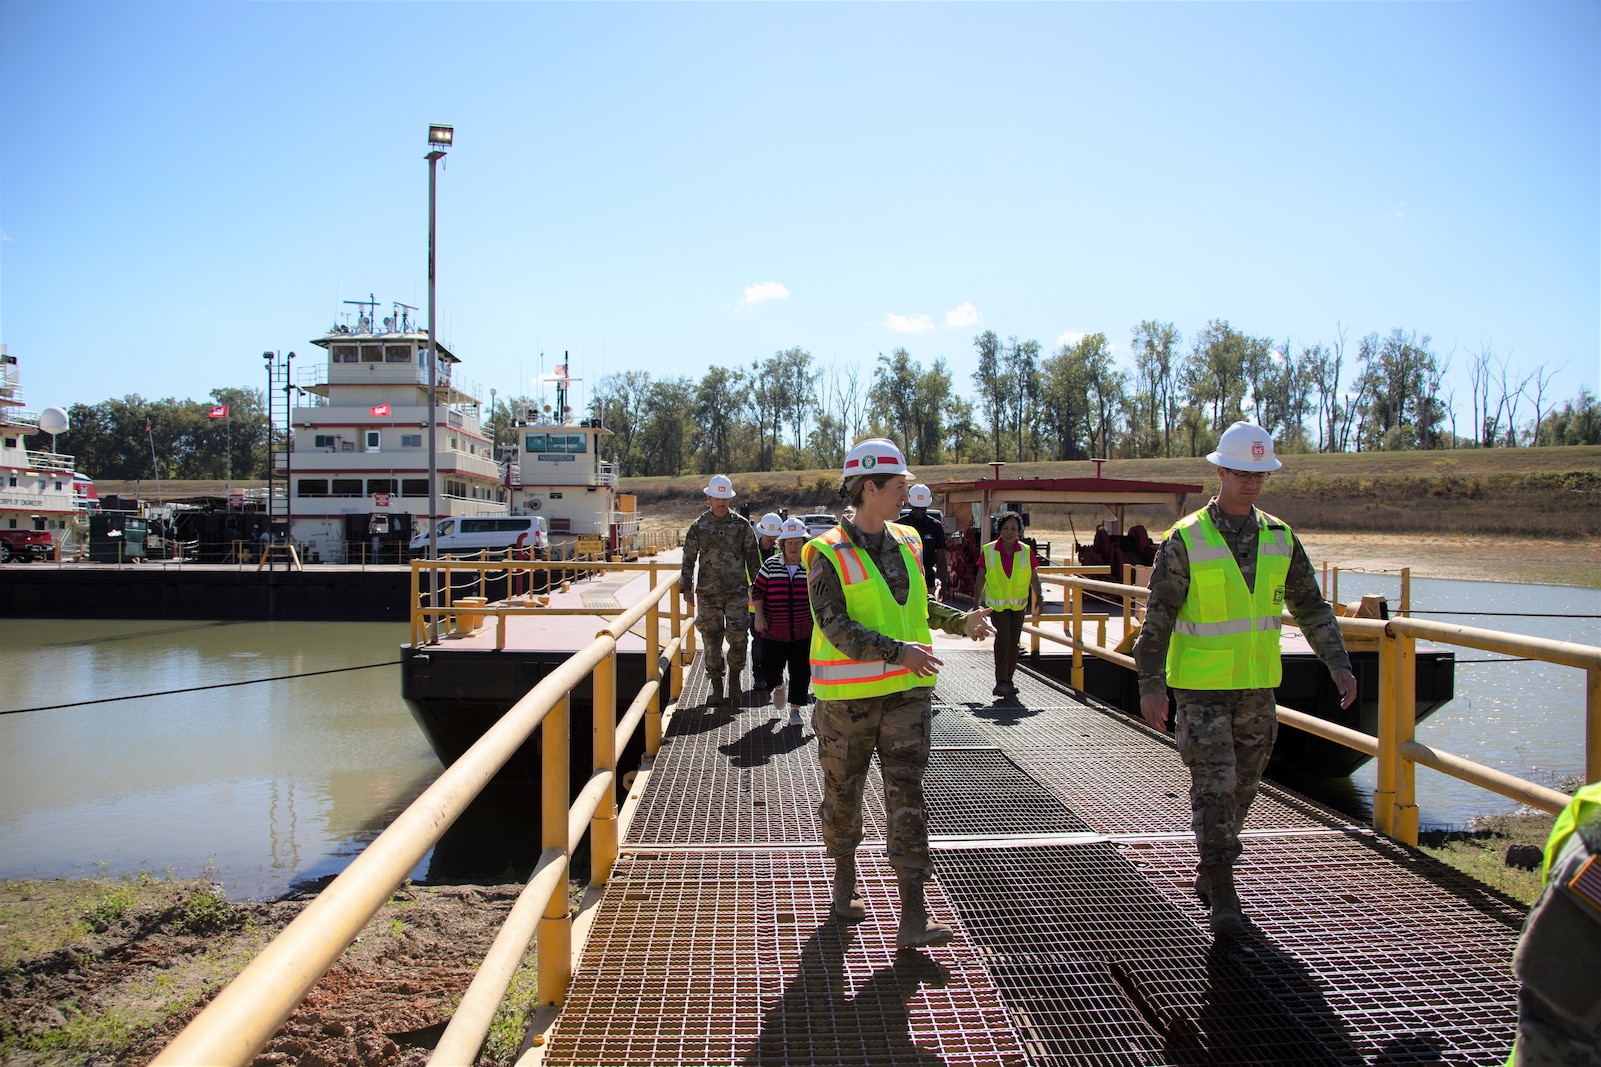 DVIDS - News - Corps seeks public comments on St. Paul Small Boat Harbor  dredging